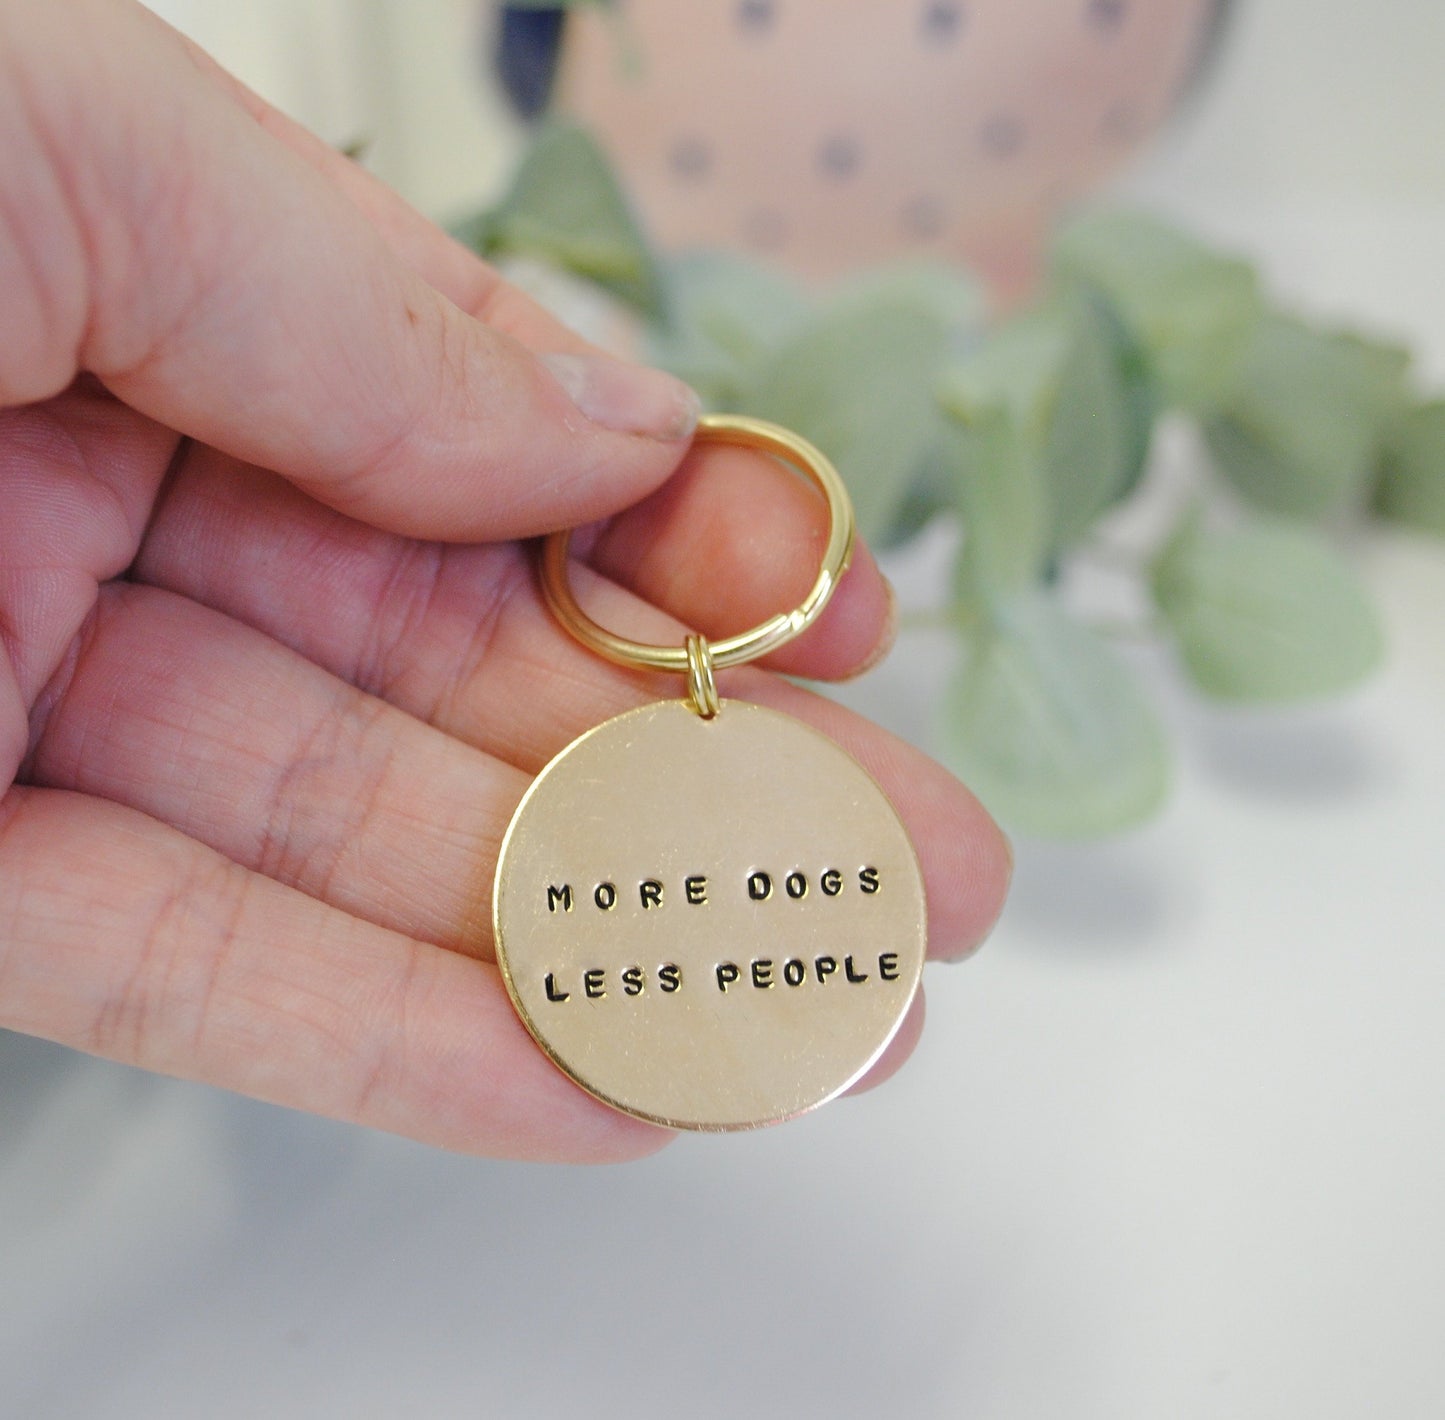 More Dogs Less People Handstamped Keychain for Dog Moms, Gift for Her, FunnyGift